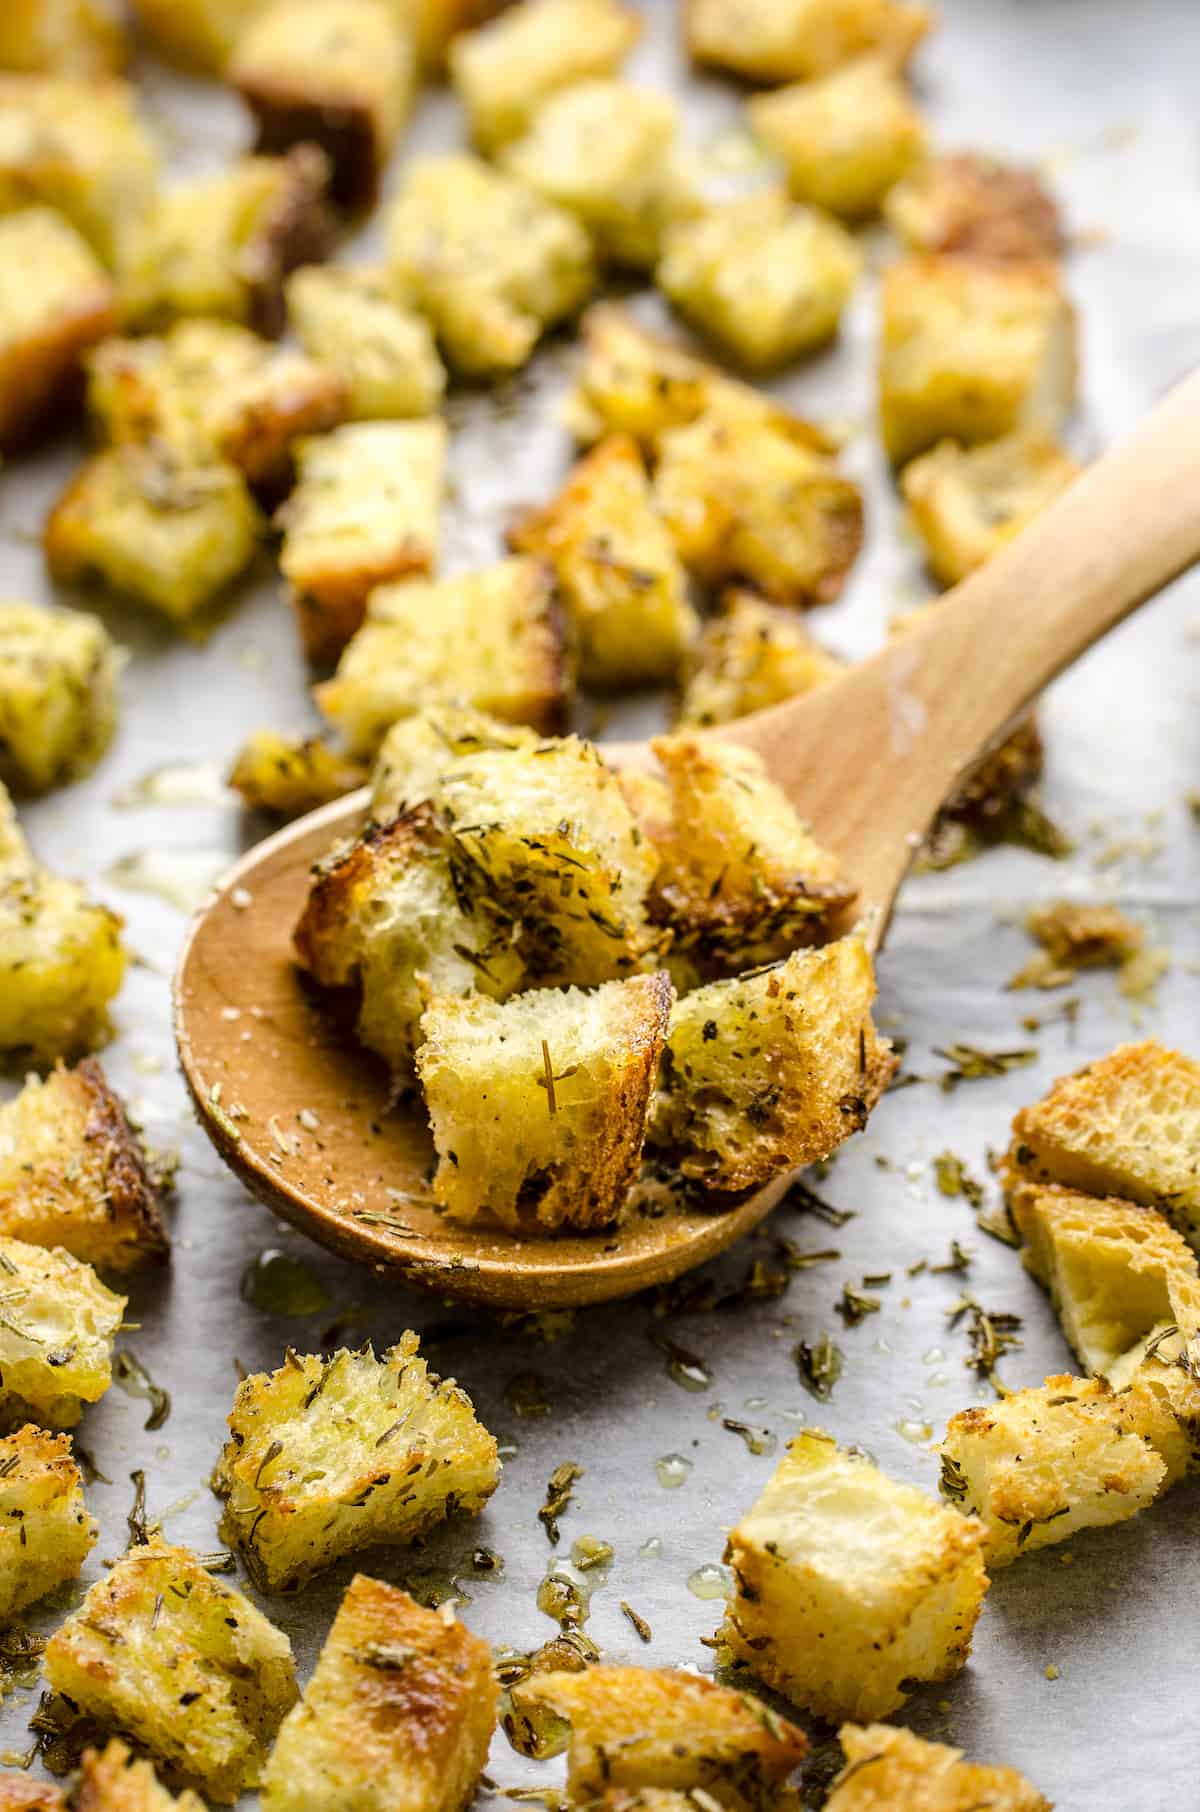 Six homemade croutons on a wooden spoon with more croutons surrounding it